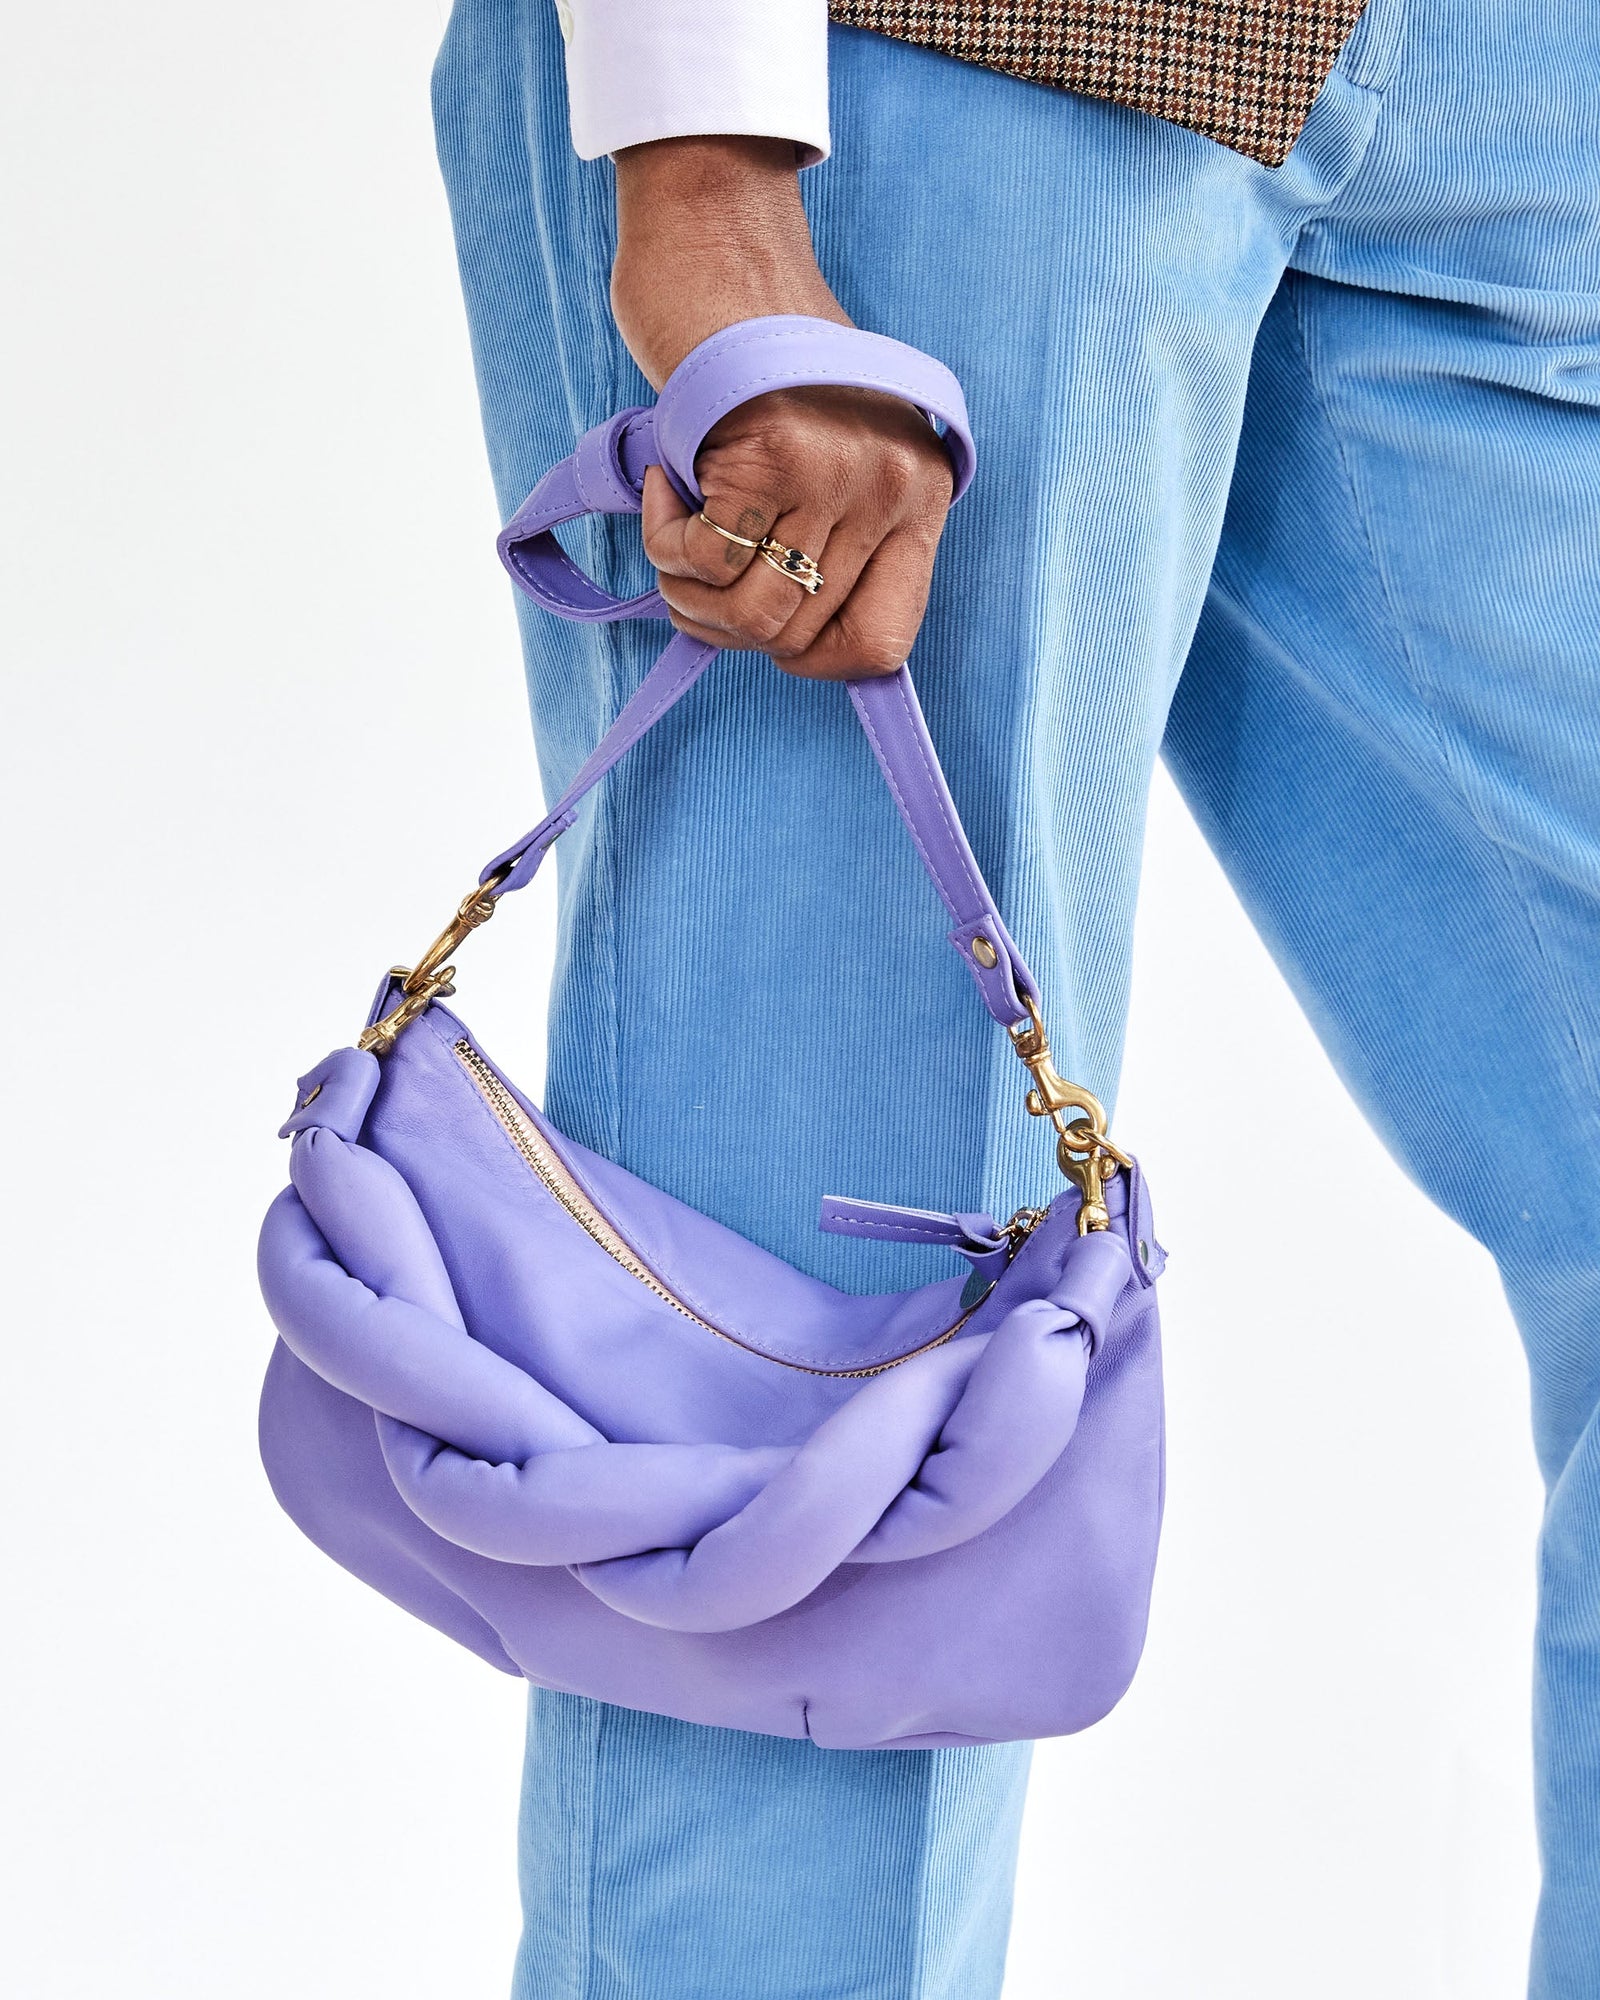 Mecca Holding the Violet Petit Moyen by Crossbody Strap with Added Violet Twisted Puff Top Handle